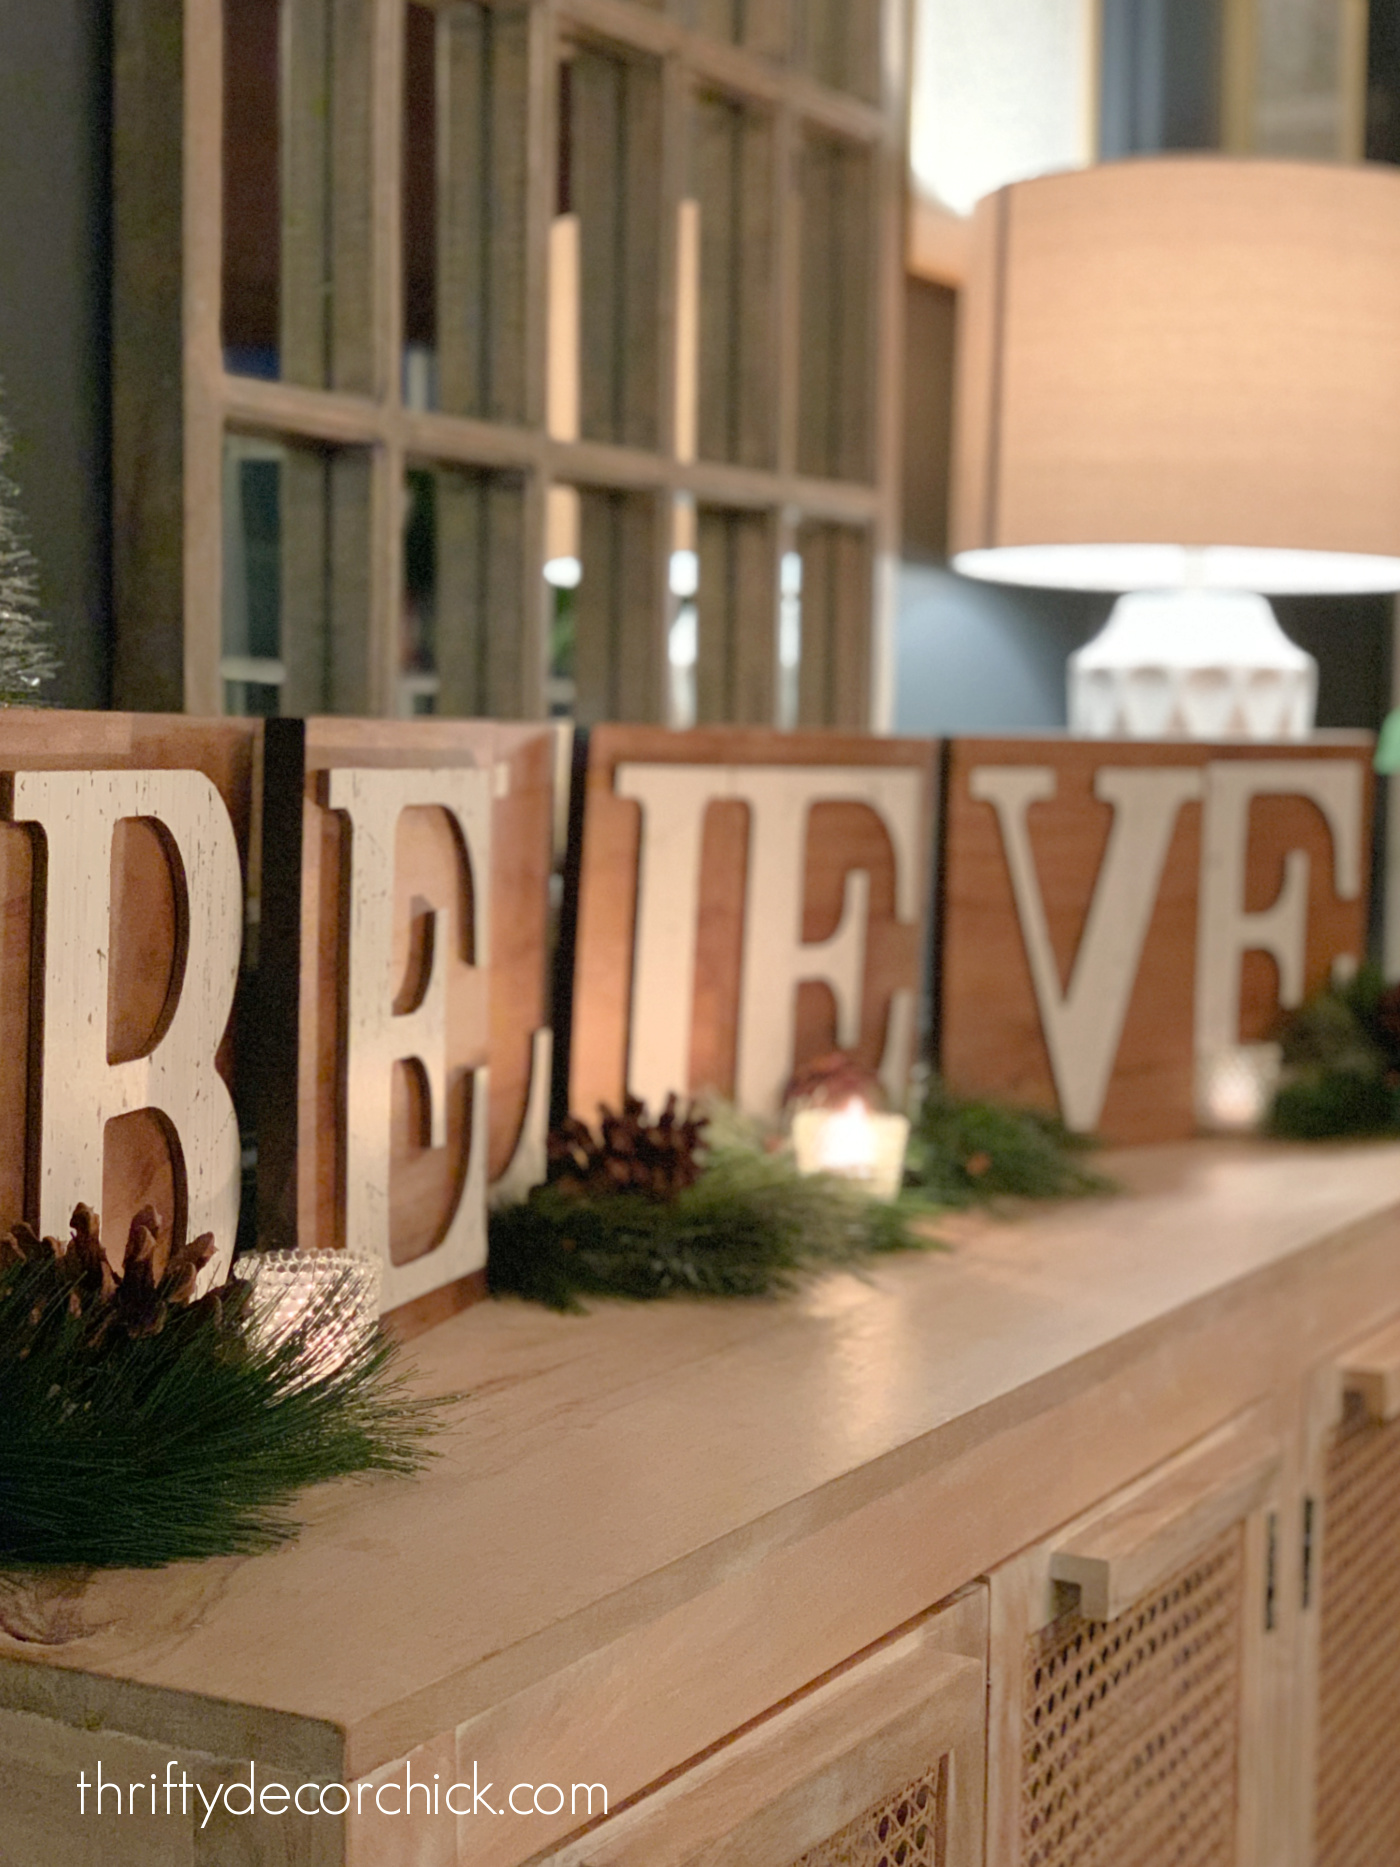 Believe letters on wood slices